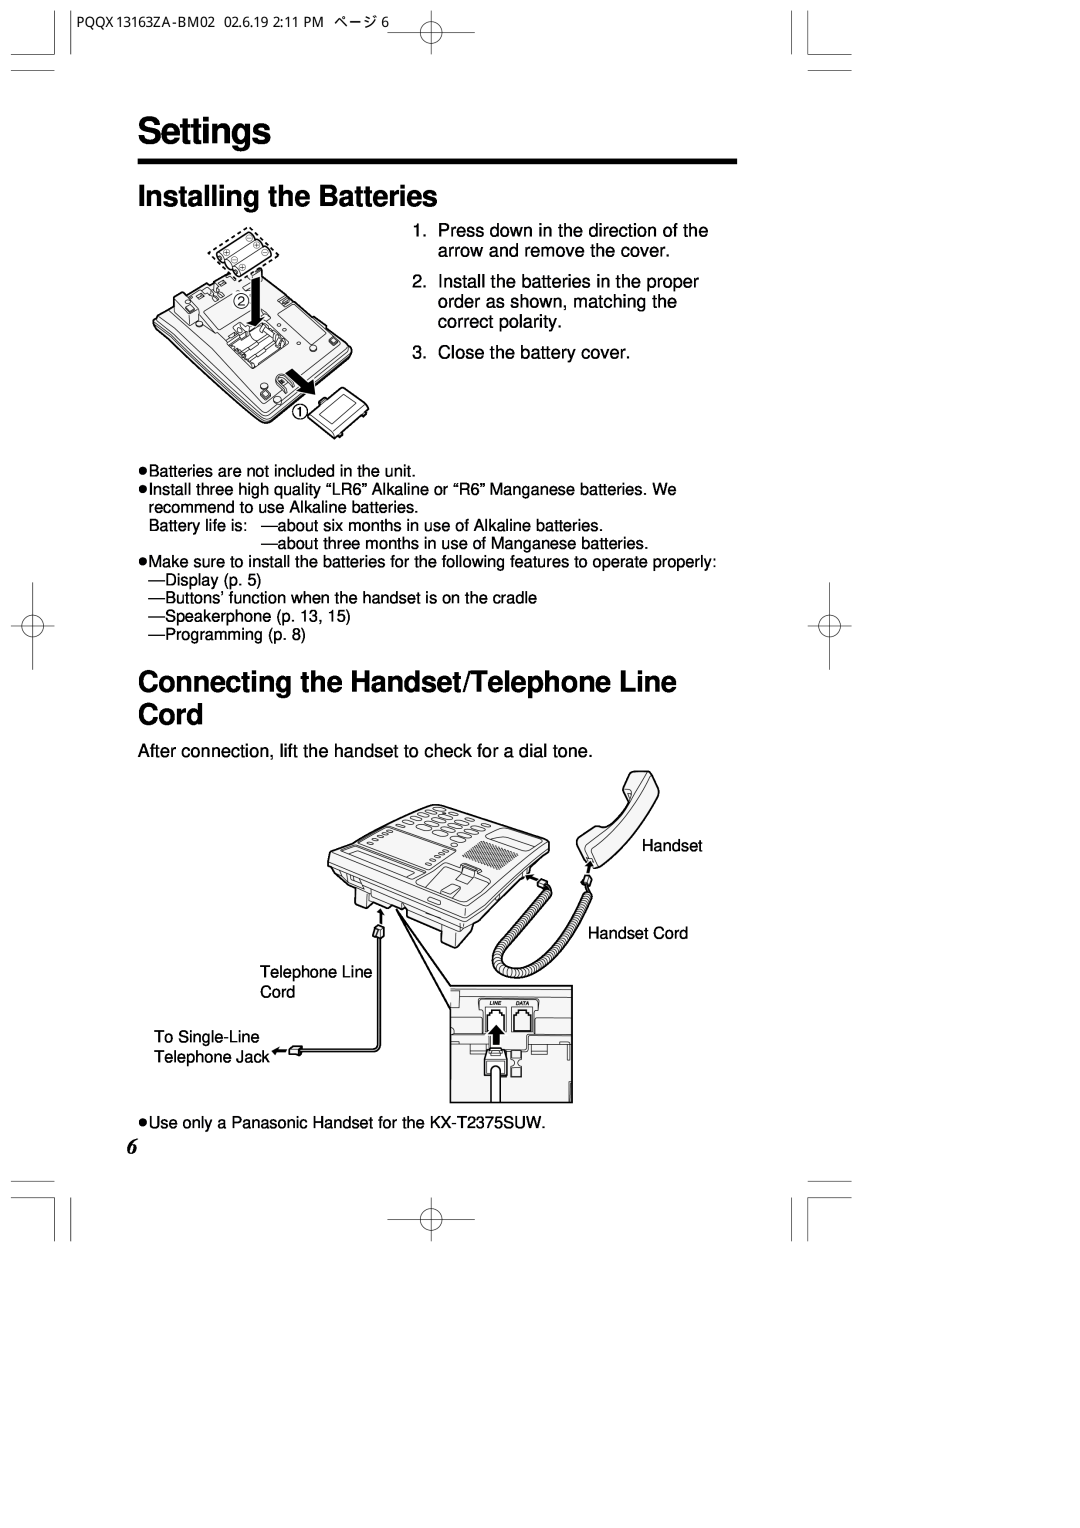 Panasonic KX-T2375SUW operating instructions Settings, Installing the Batteries, Connecting the Handset/Telephone Line Cord 